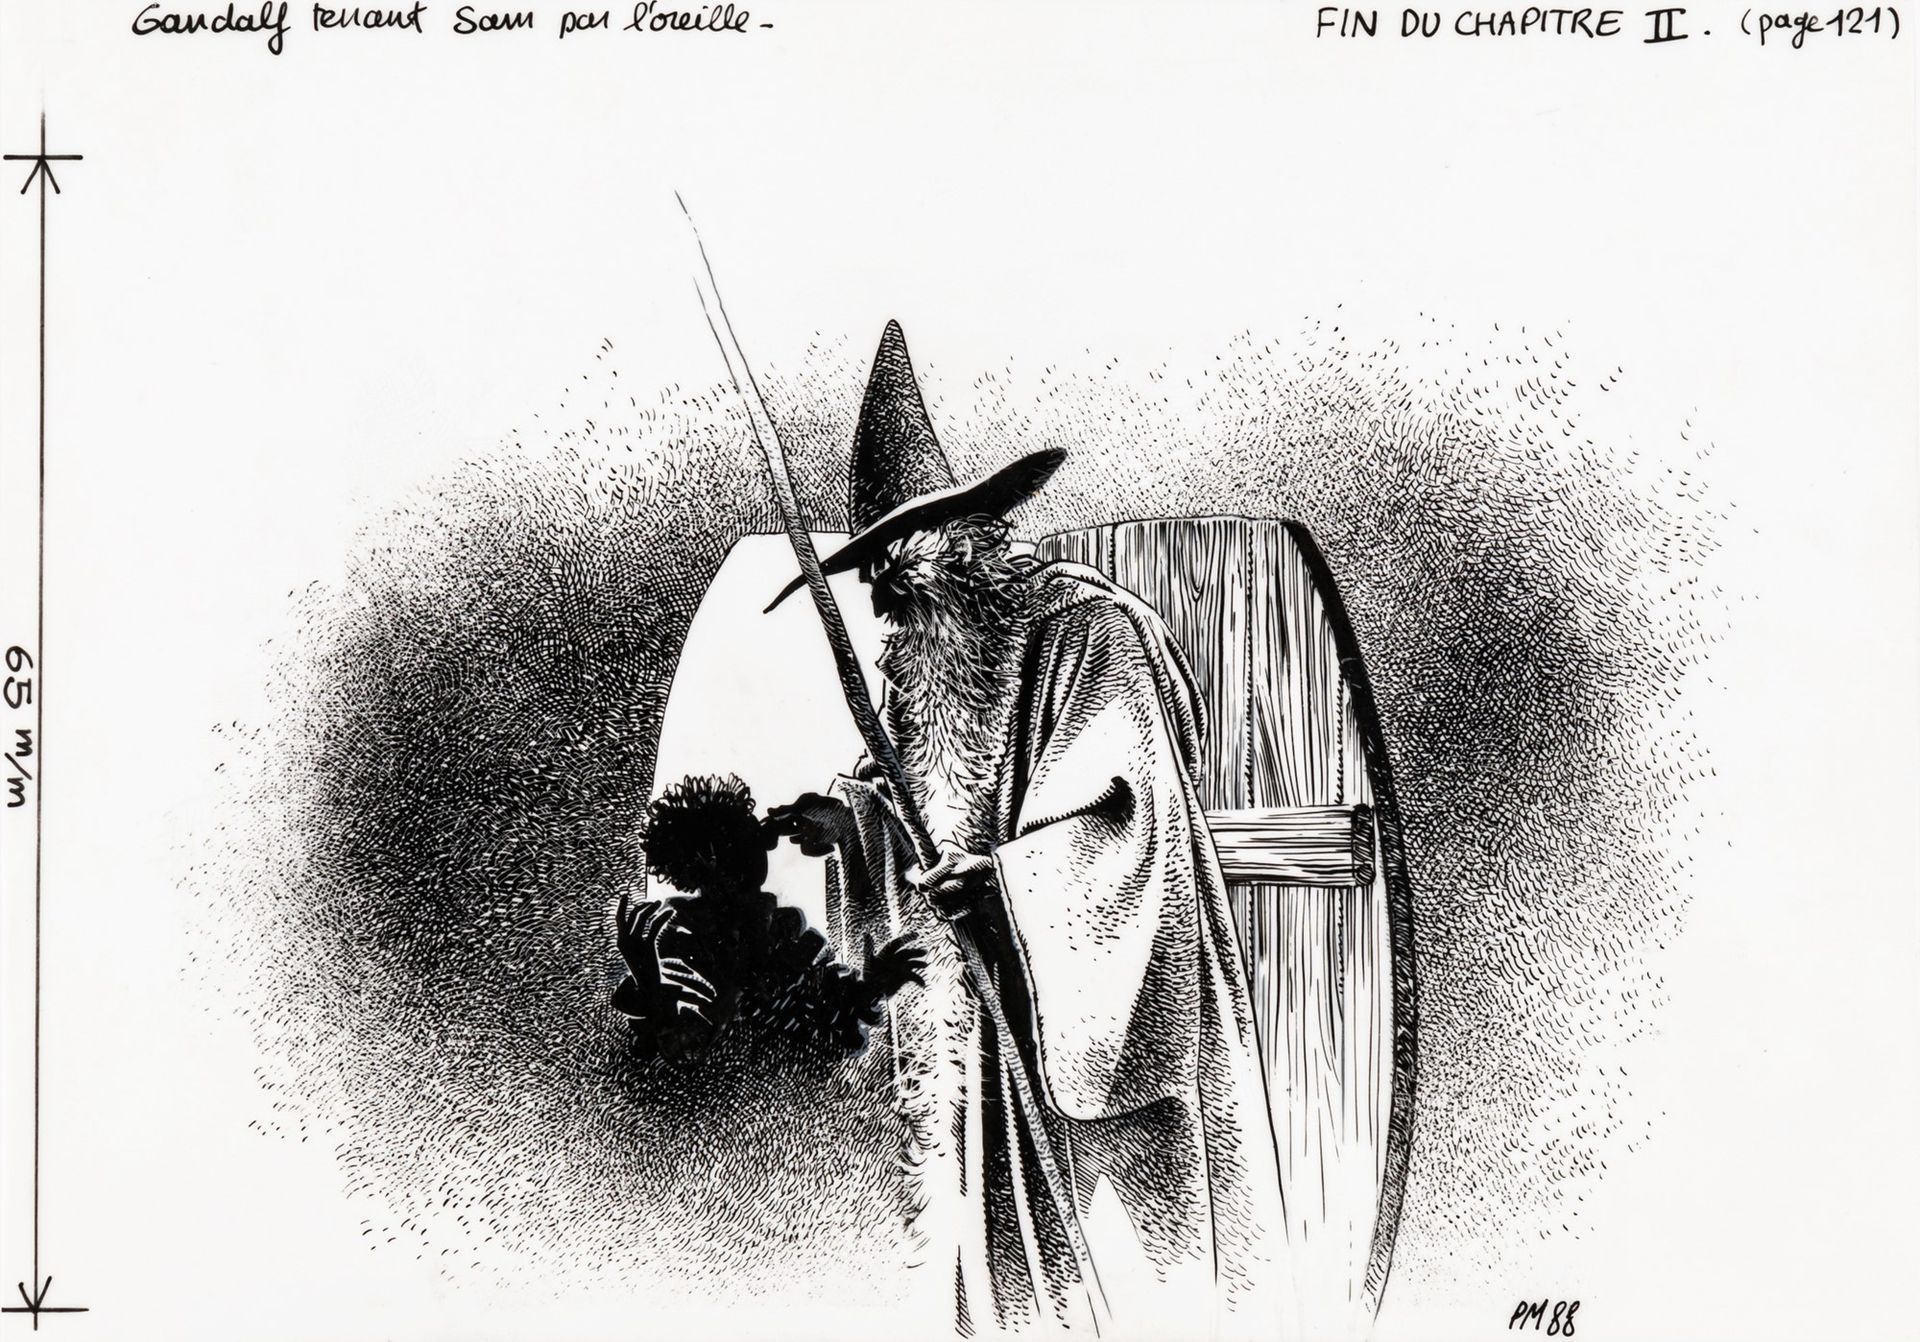 Philippe Munch Gandalf holds Sam by the ear, 1988

ink on tracing paper
21 x 14.&hellip;